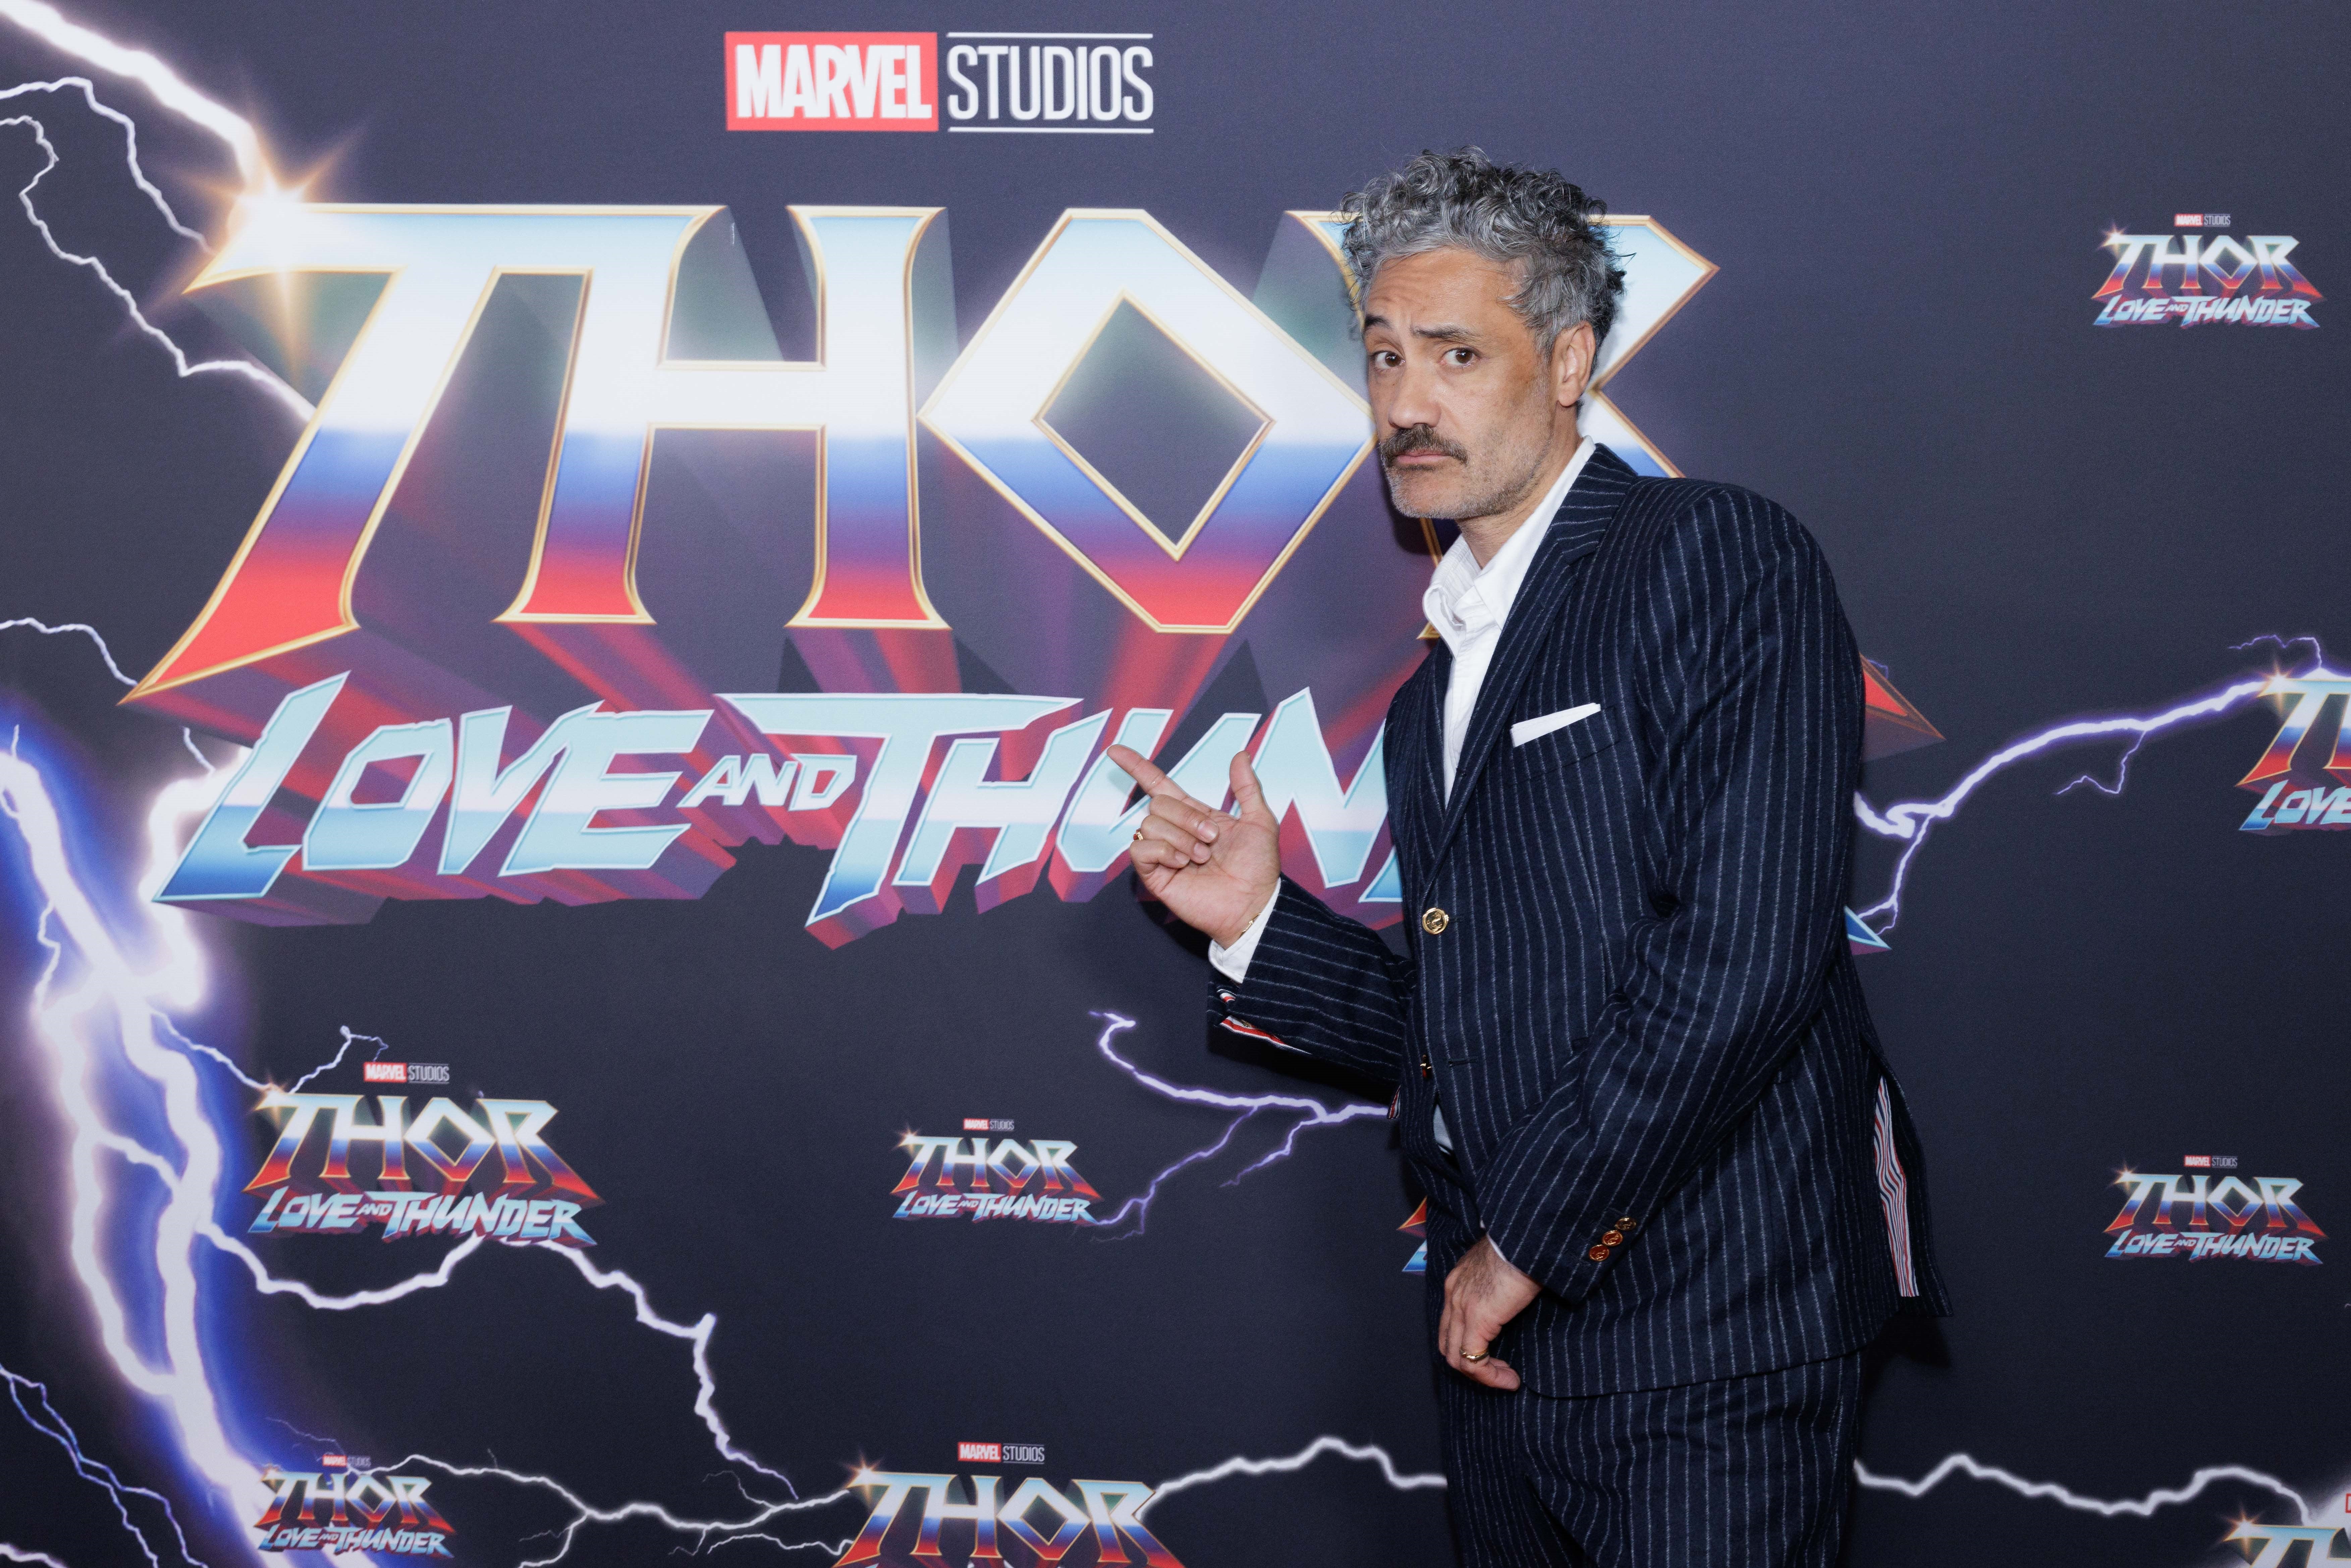 Thor: Love and Thunder' Director Taika Waititi Reveals Chris Hemsworth's  Secret Acting Talent: 'Chris Is Incredible'